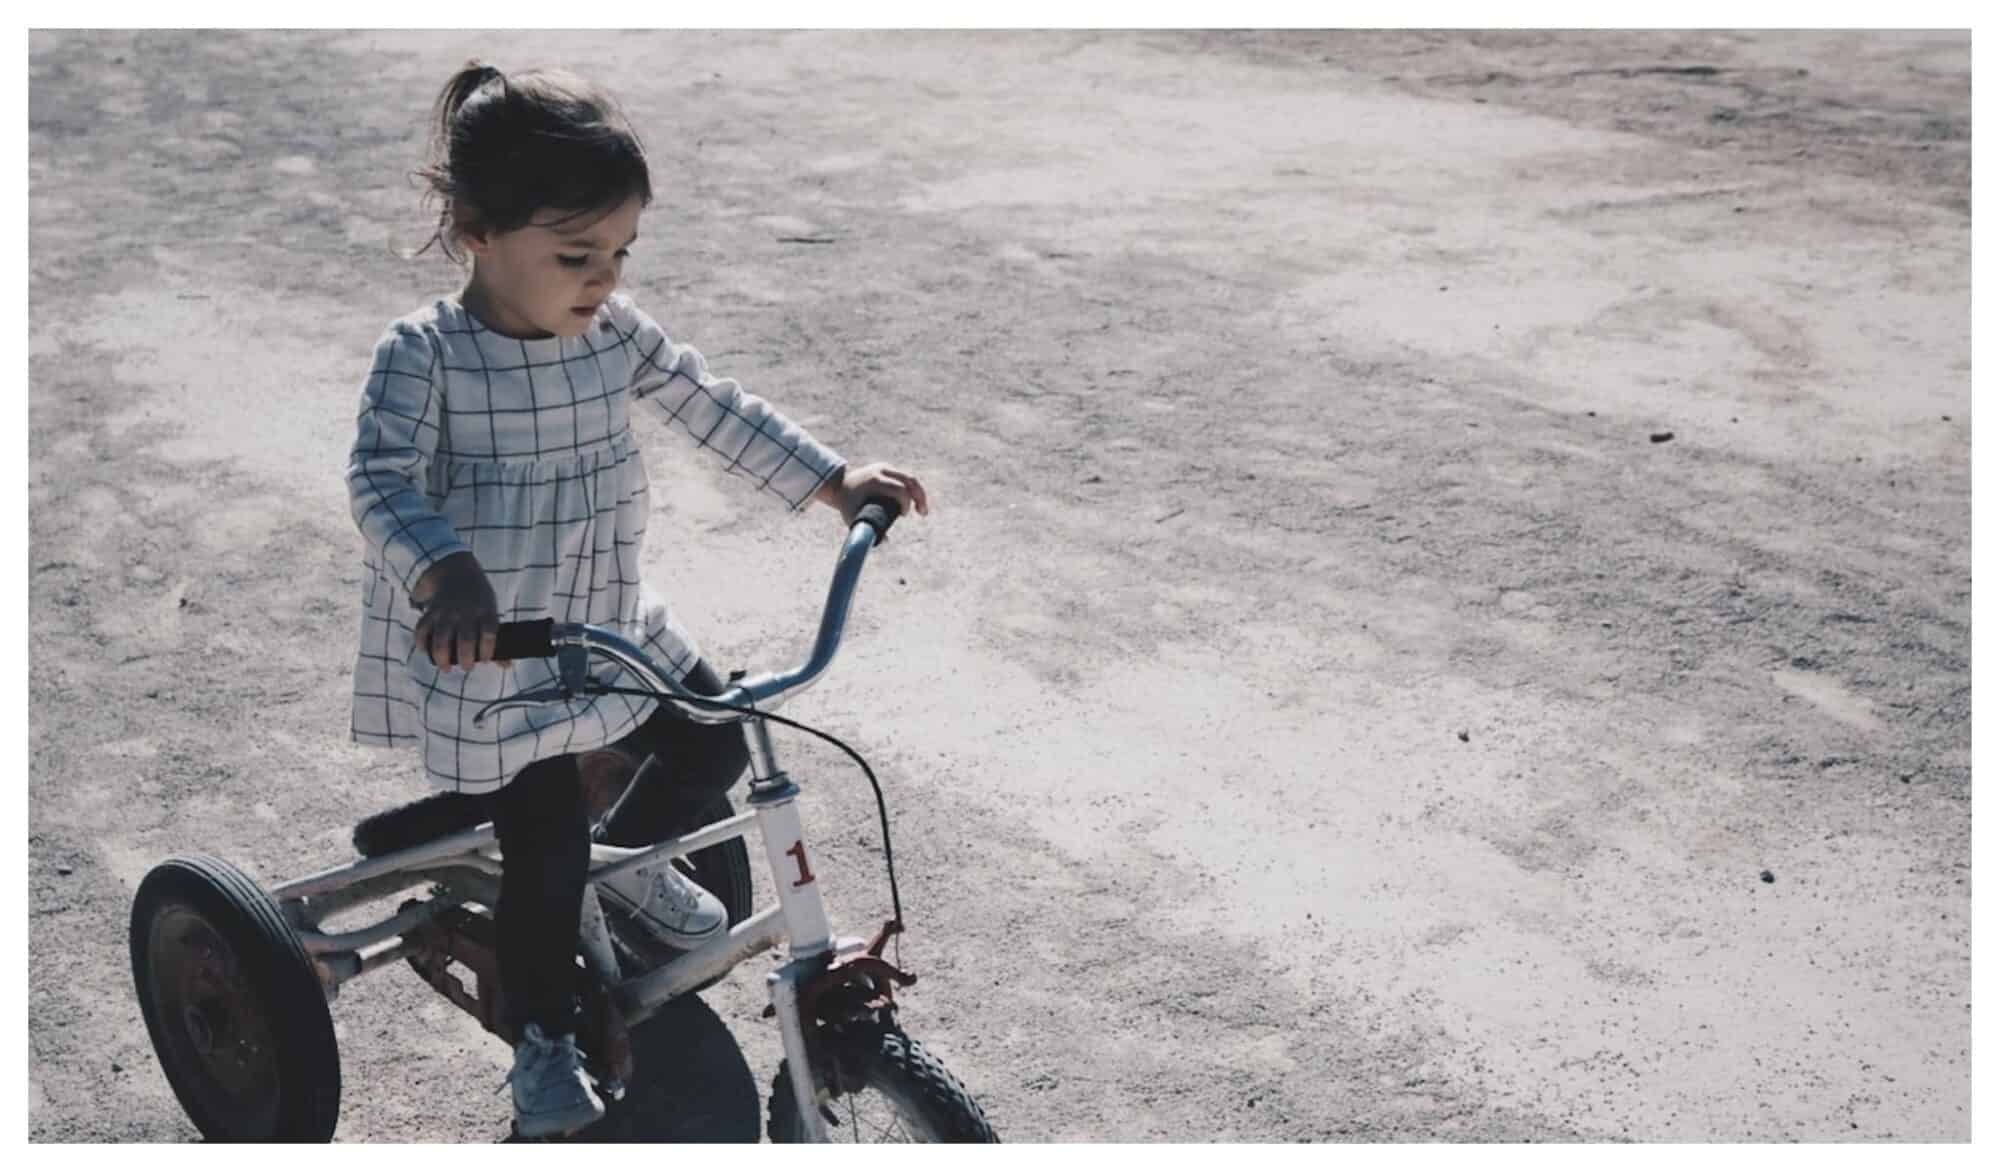 A young girl with a white and blacked striped dress and her dark brown hair tied in a pony-tail rides her tricycle on the concrete.